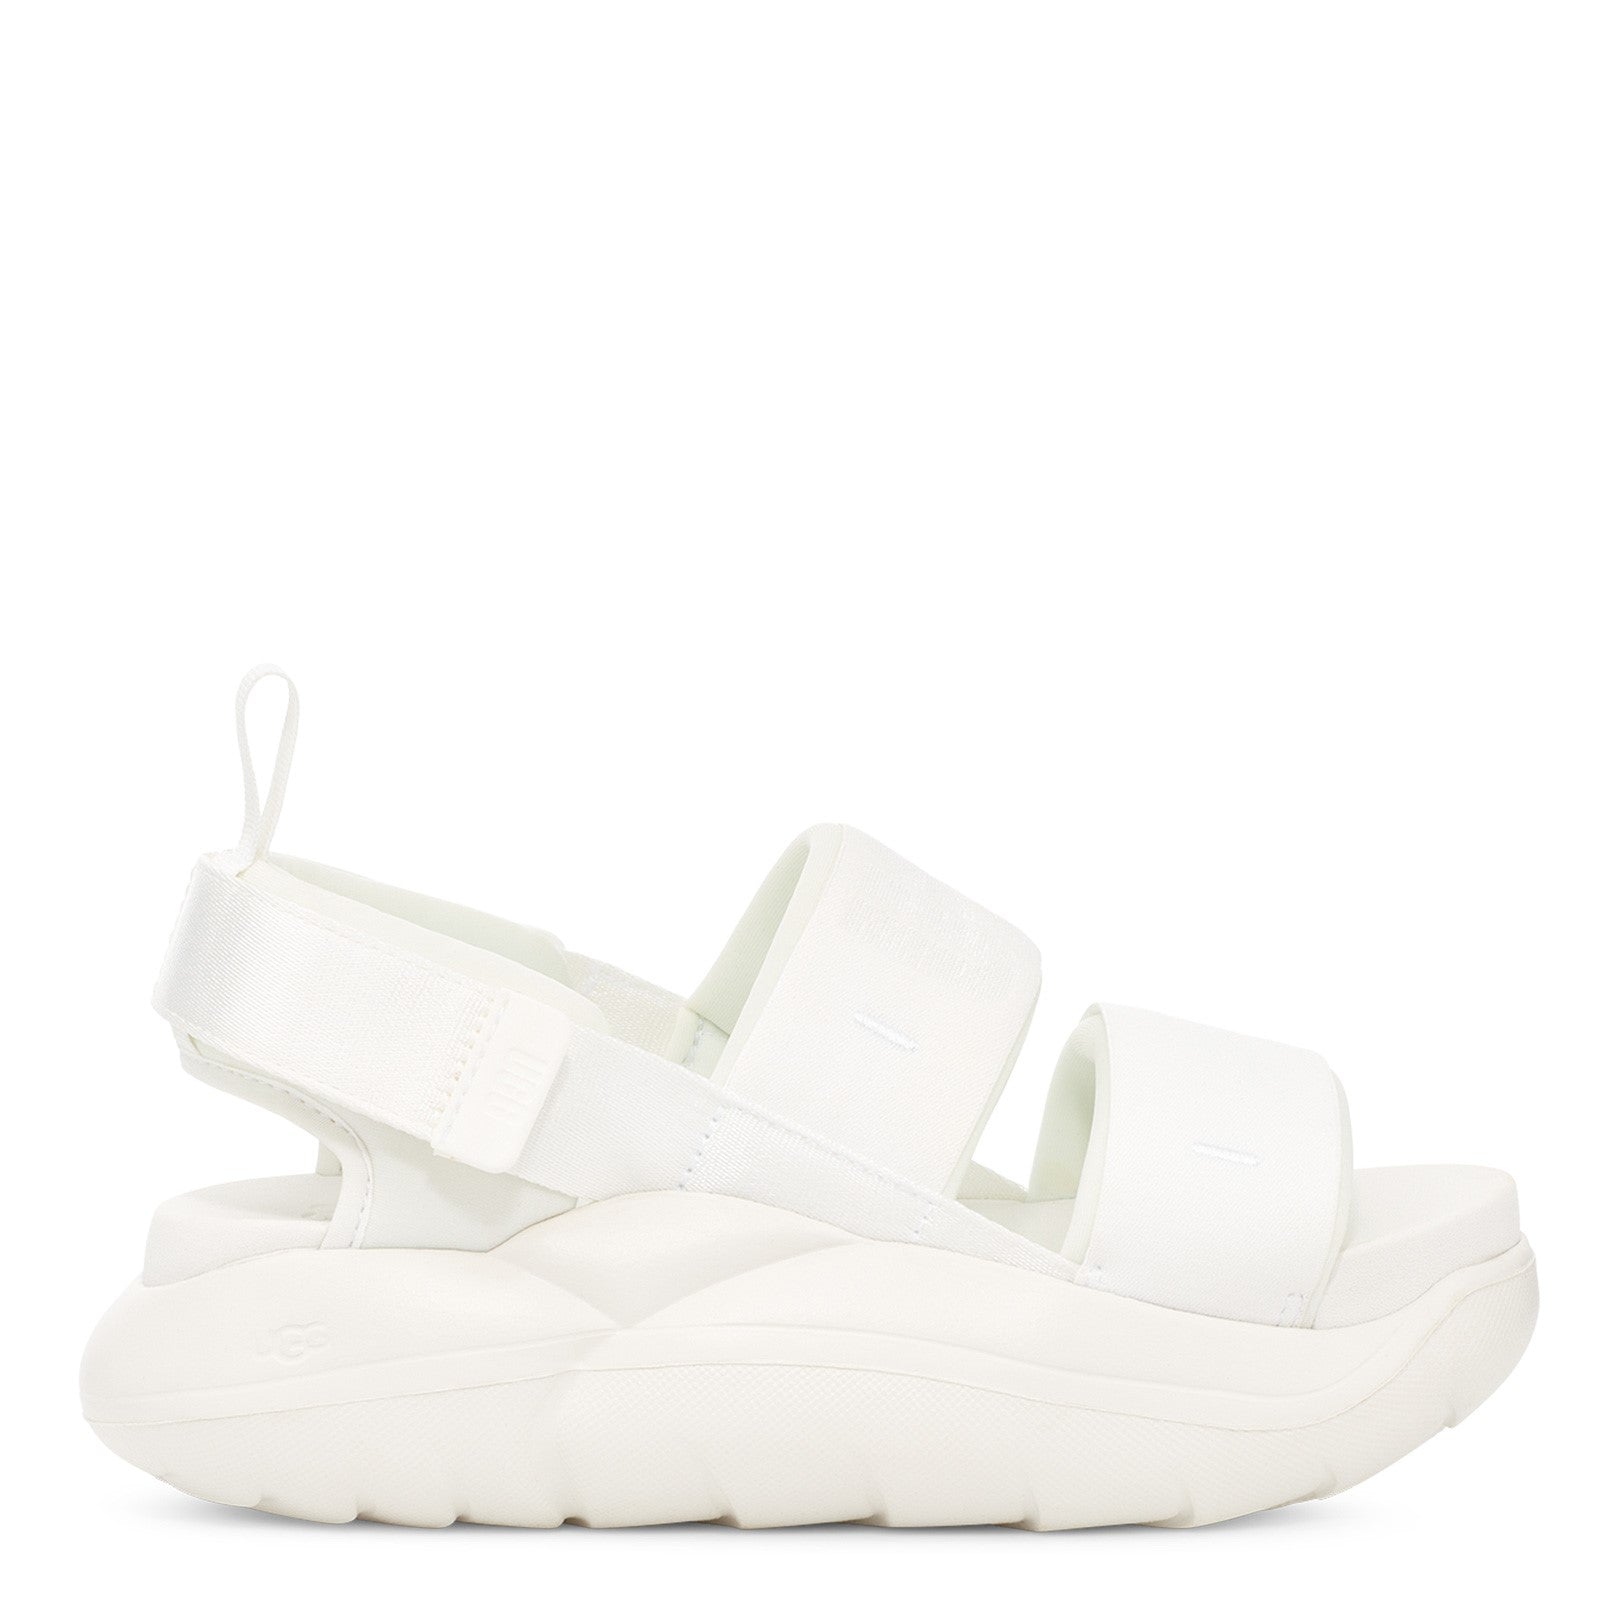 Lateral view of the Women's LA Cloud Sport sandal by UGG in the color white